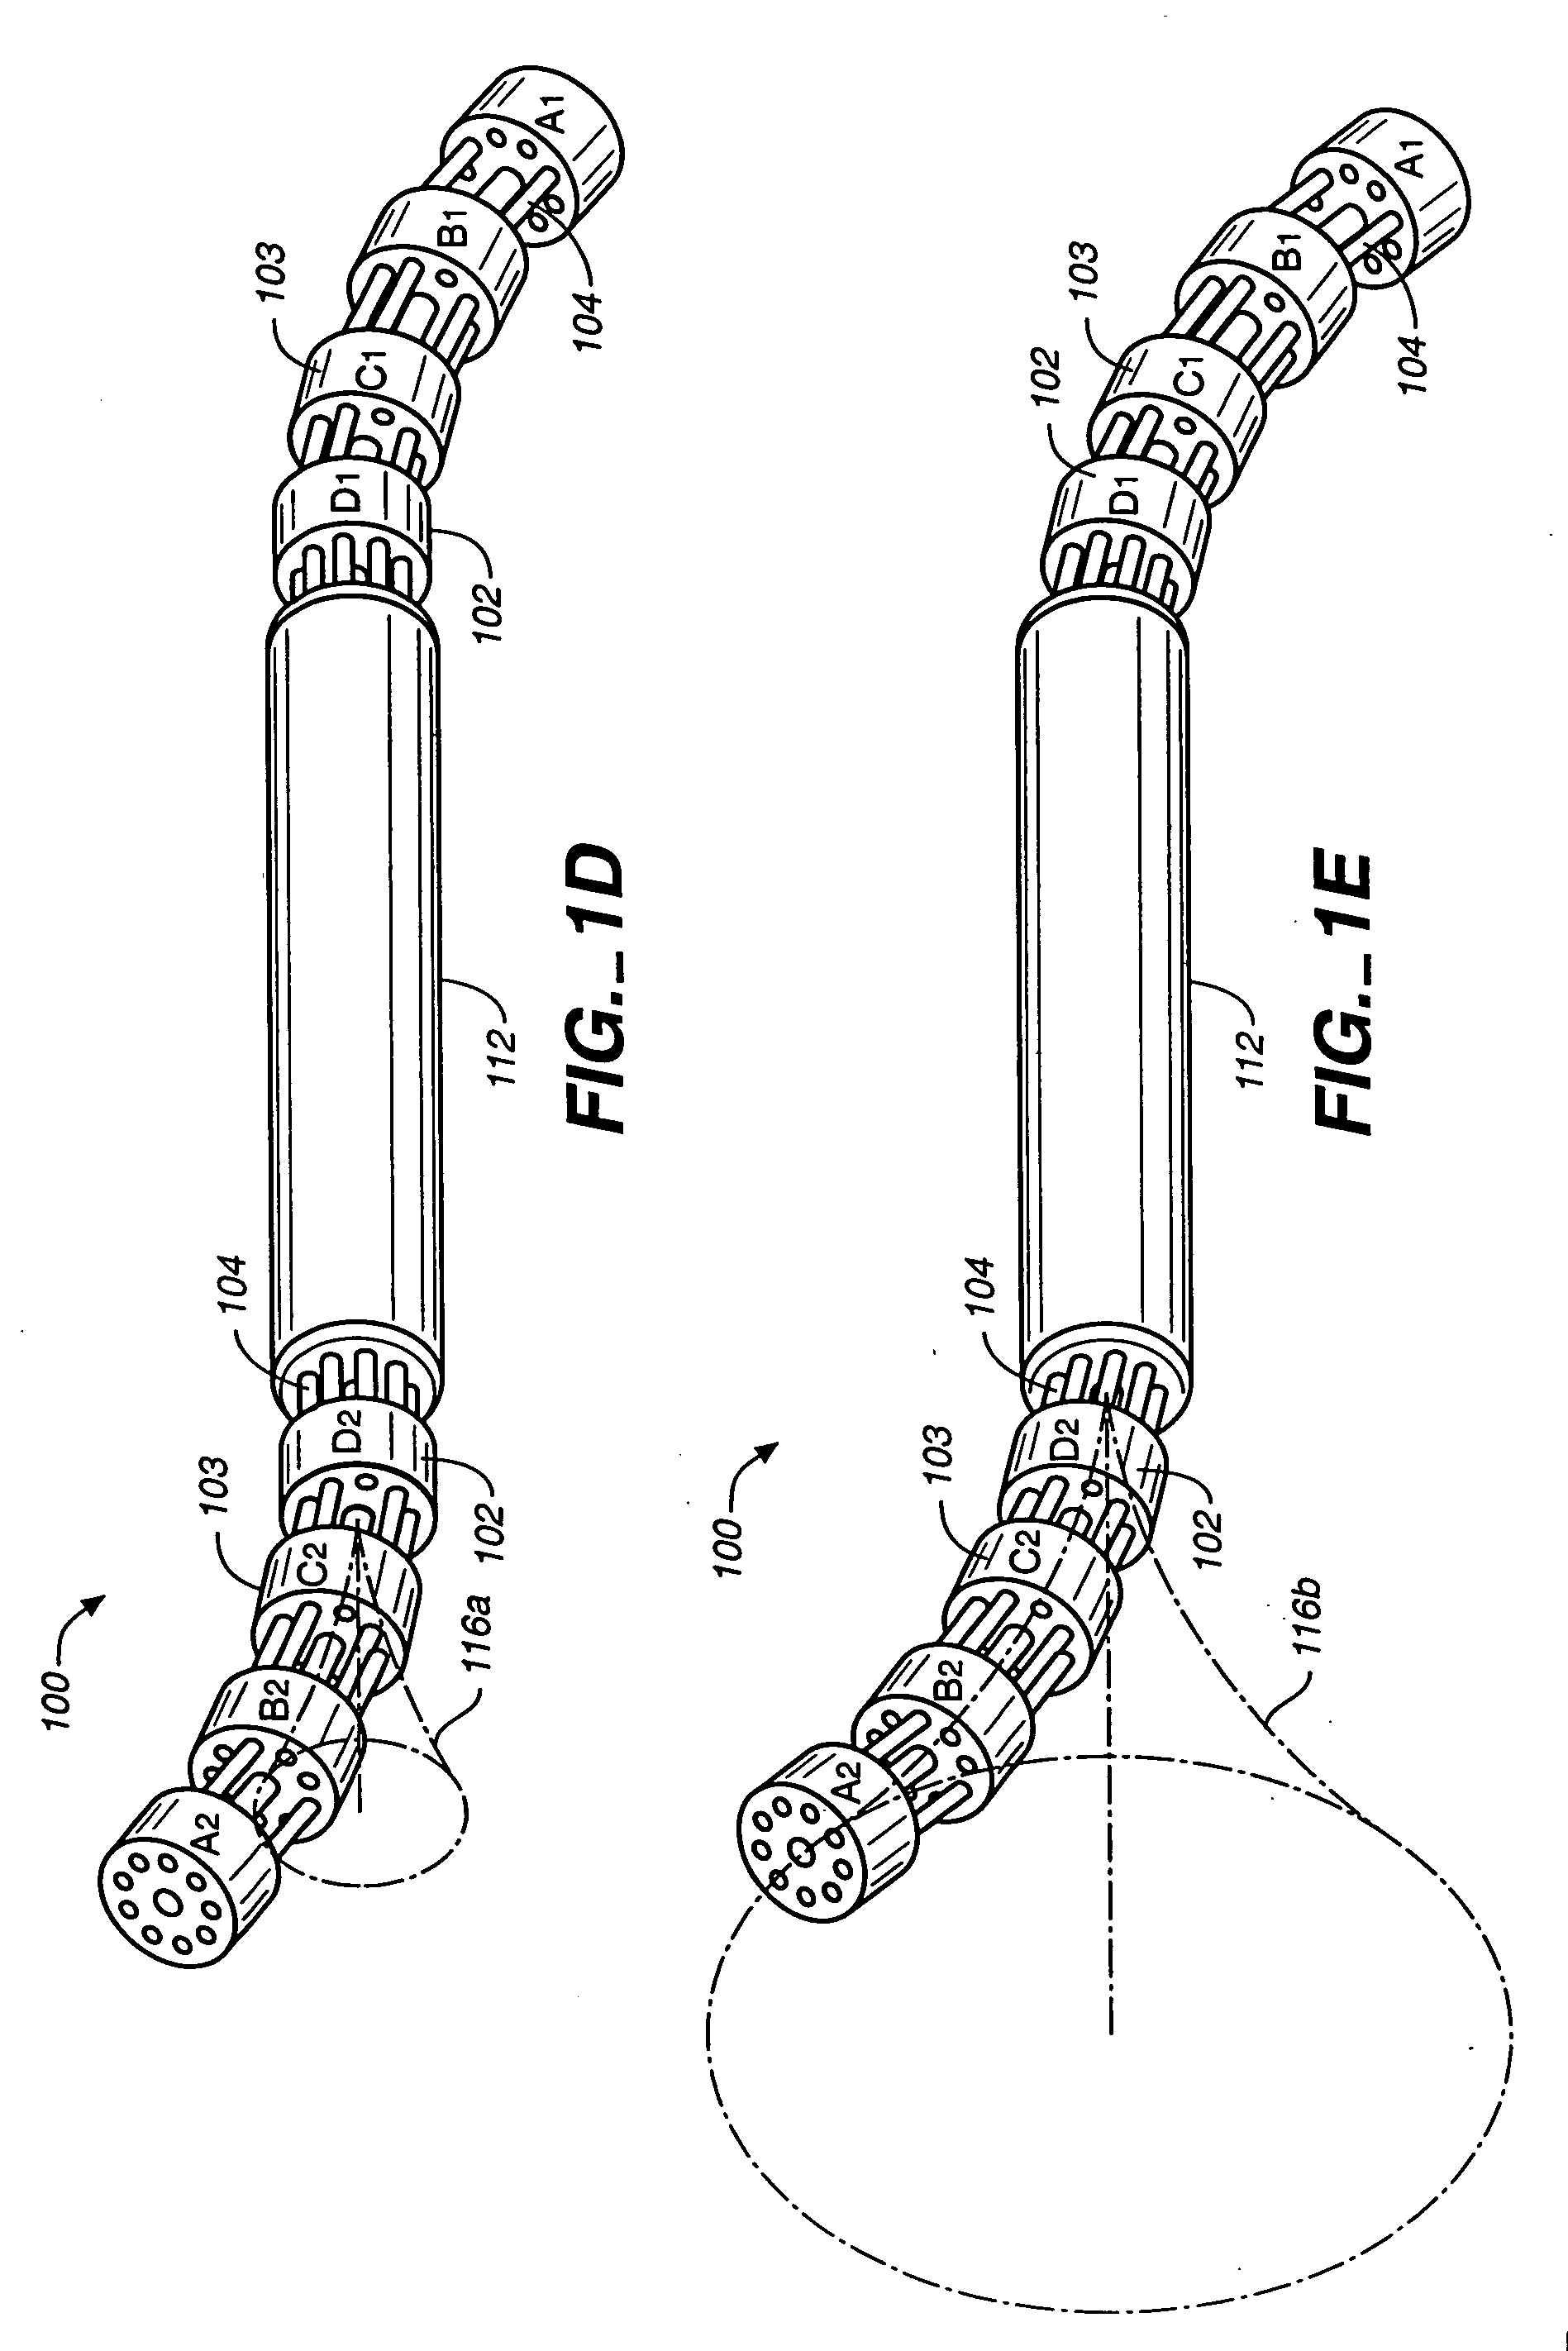 Articulating mechanism for remote manipulation of a surgical or diagnostic tool